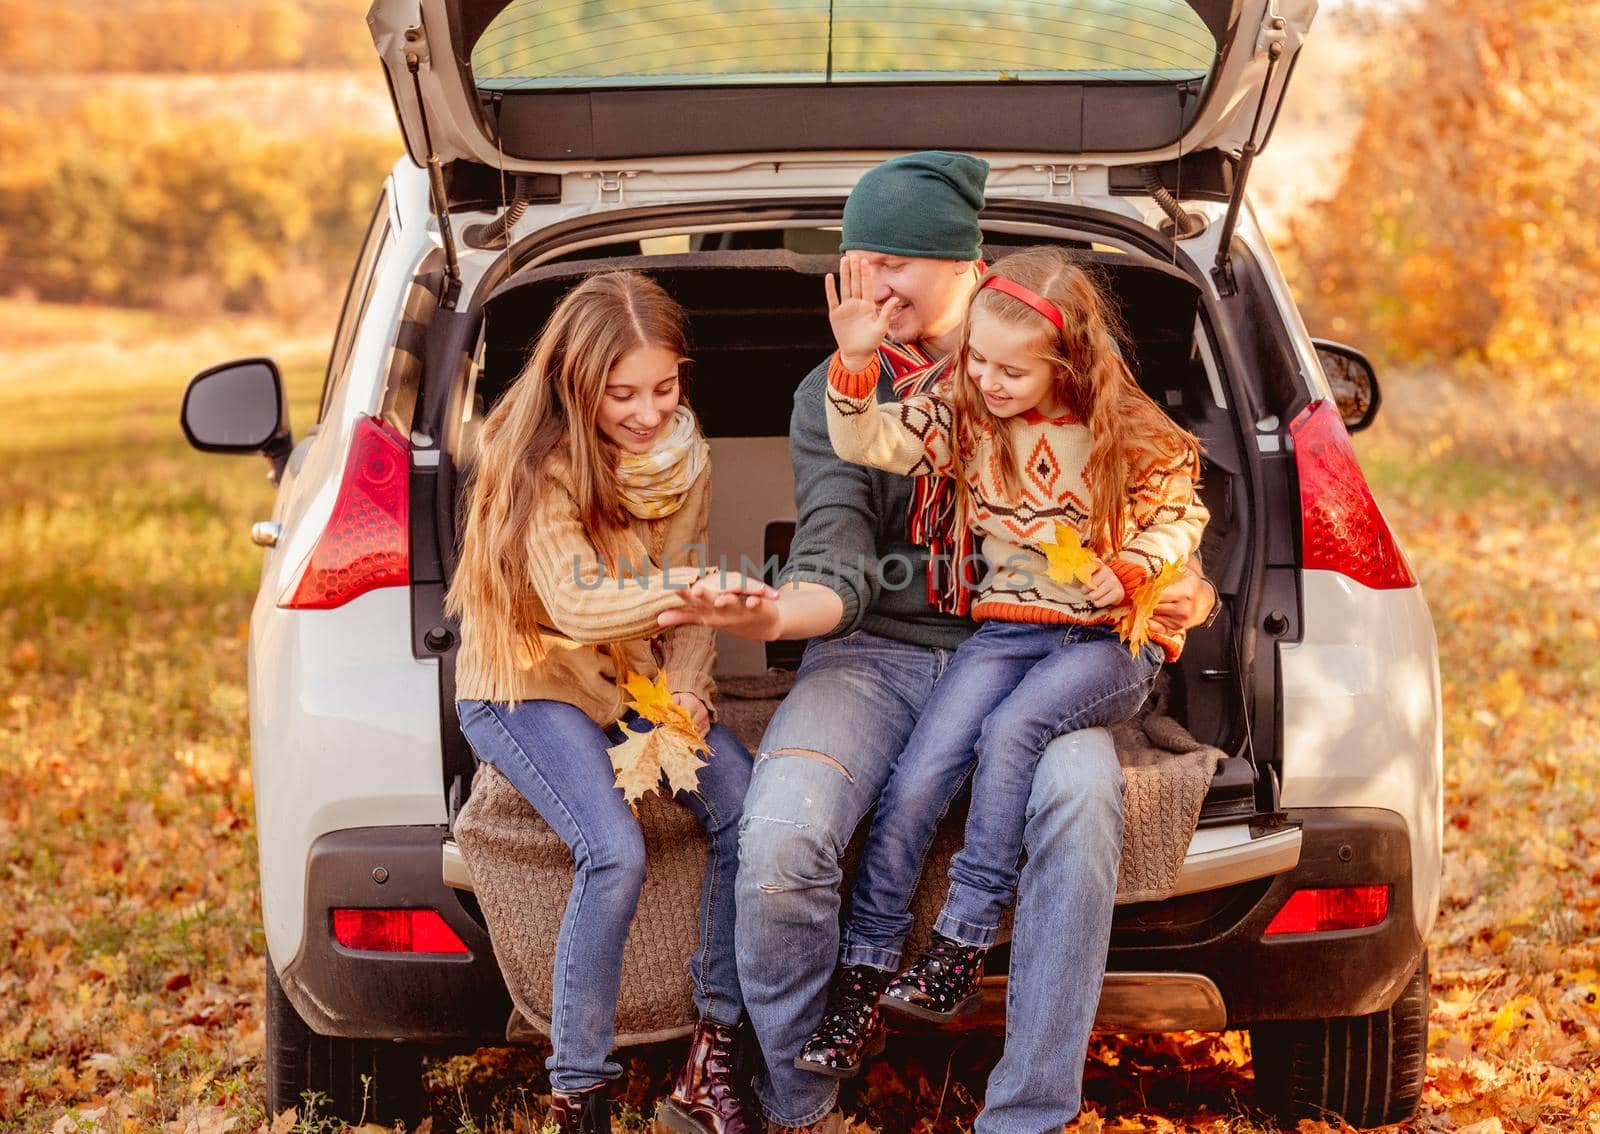 Smiling father with daughters in autumn surroundings